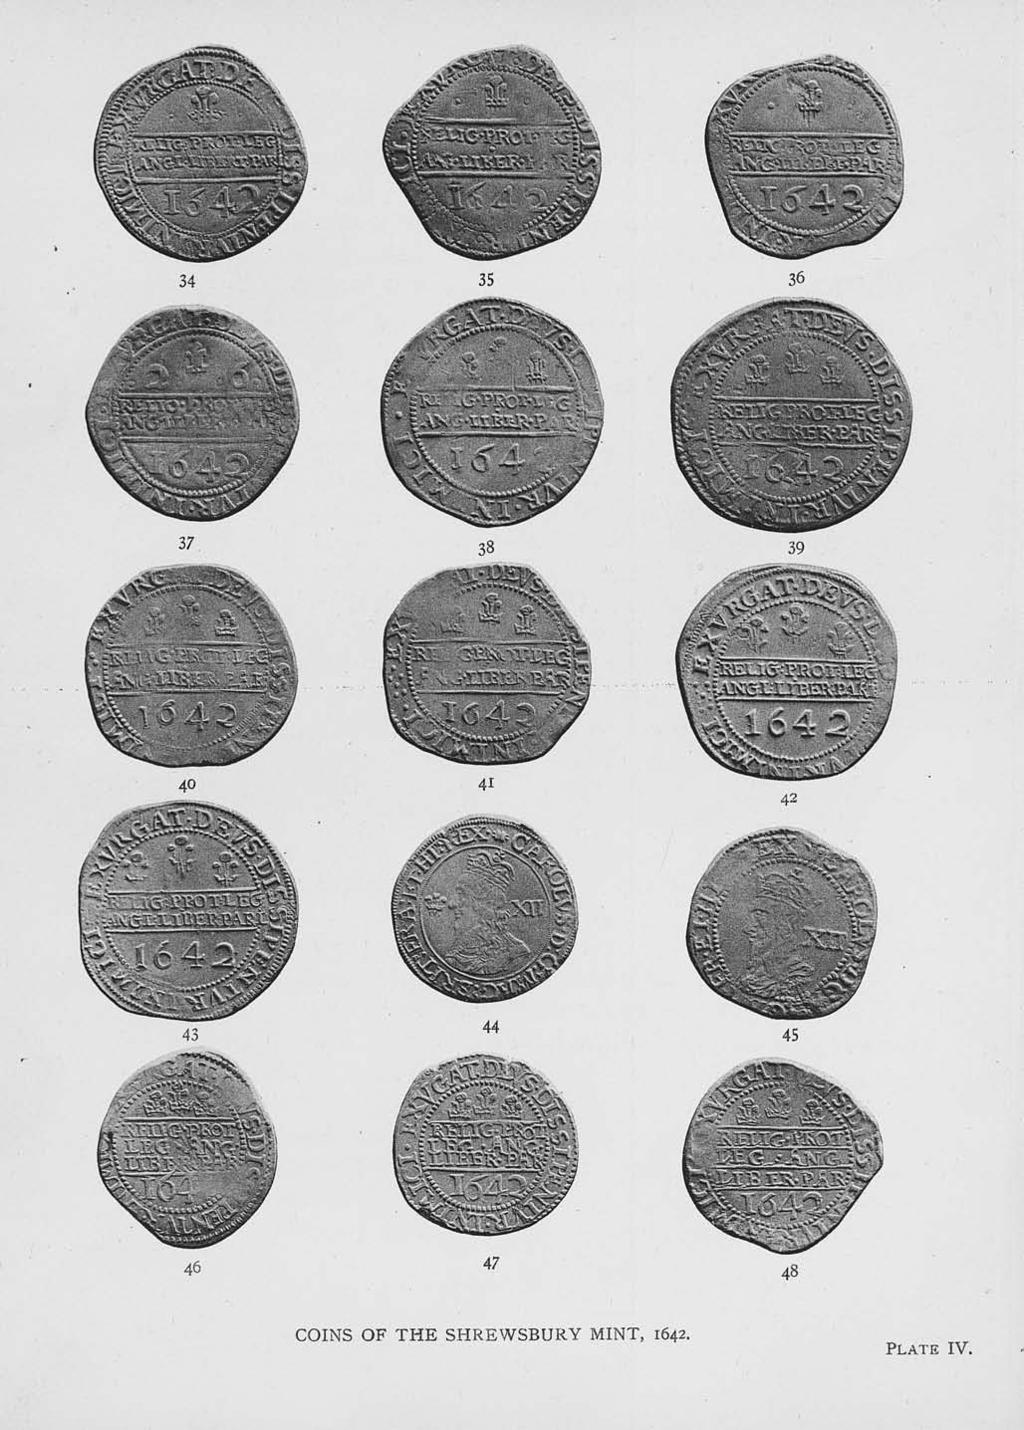 COINS OF THE